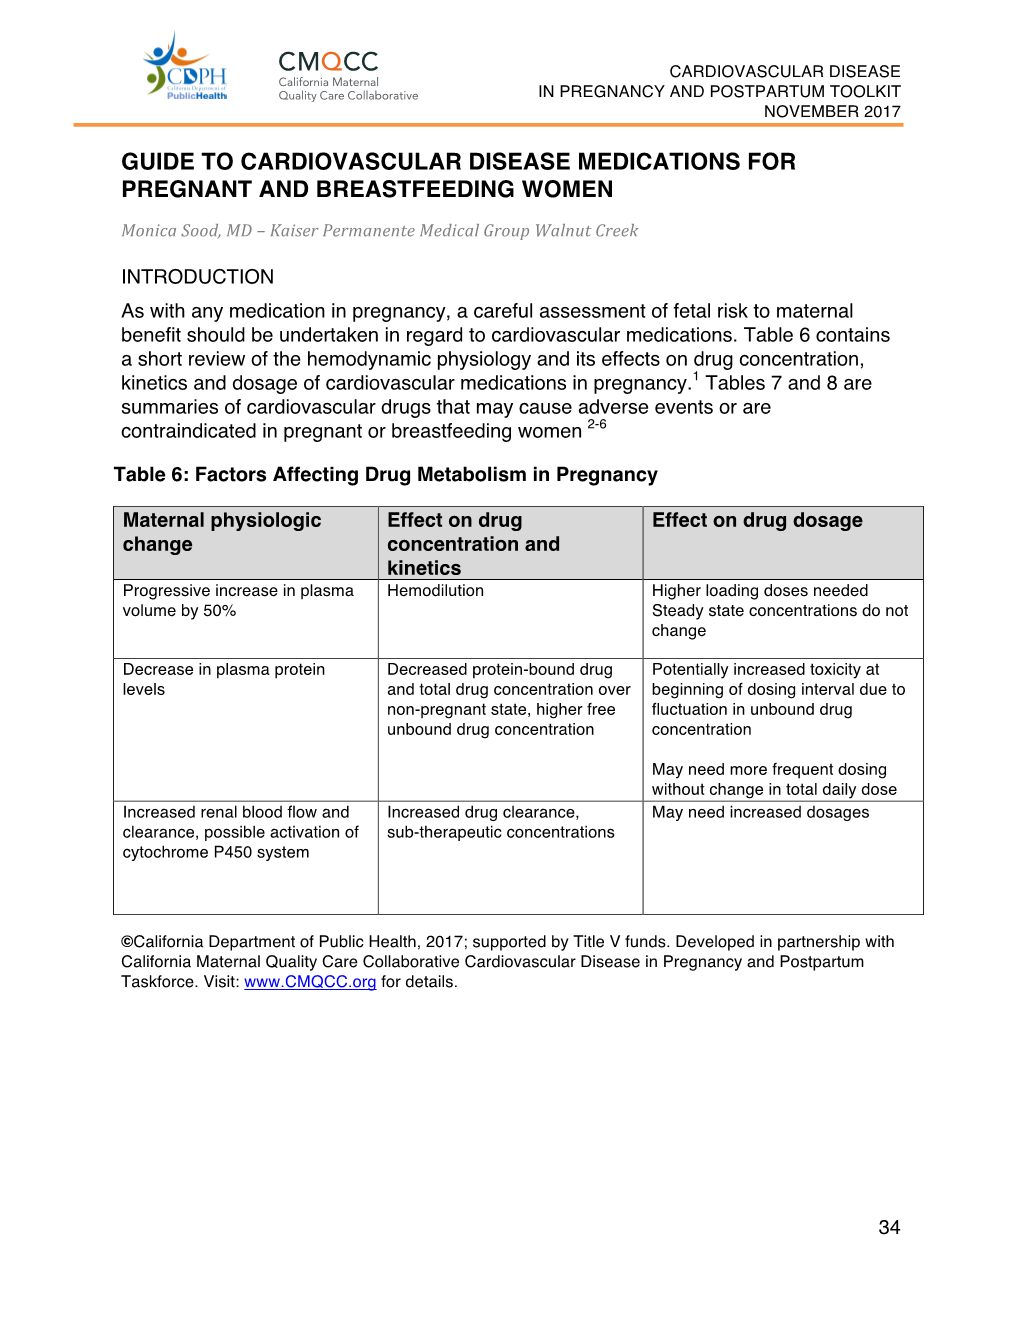 Guide to Cardiovascular Disease Medications for Pregnant and Breastfeeding Women